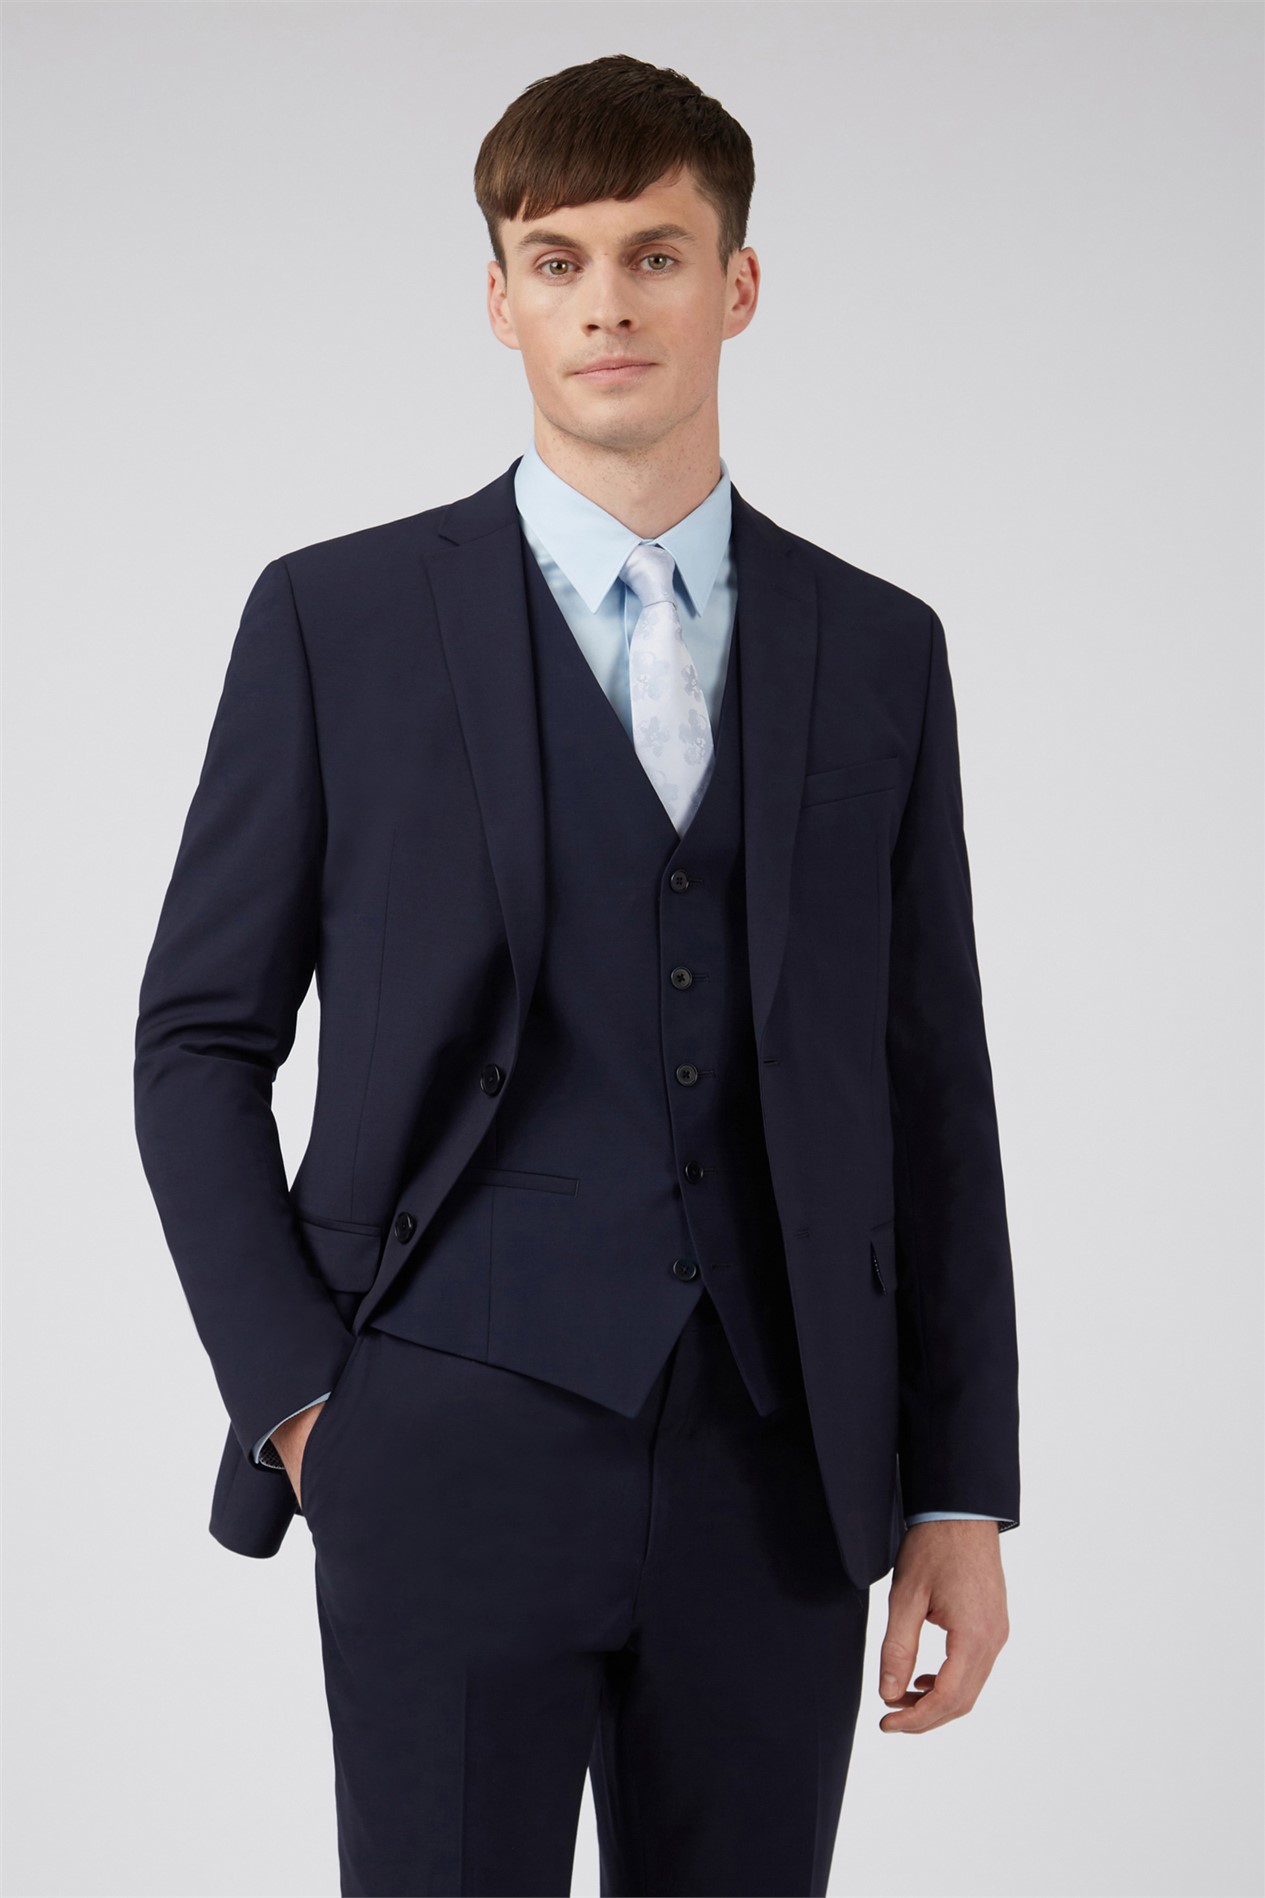 Ted Baker Navy Slim Fit 3 Piece Suit - Tom Murphy's Formal and Menswear